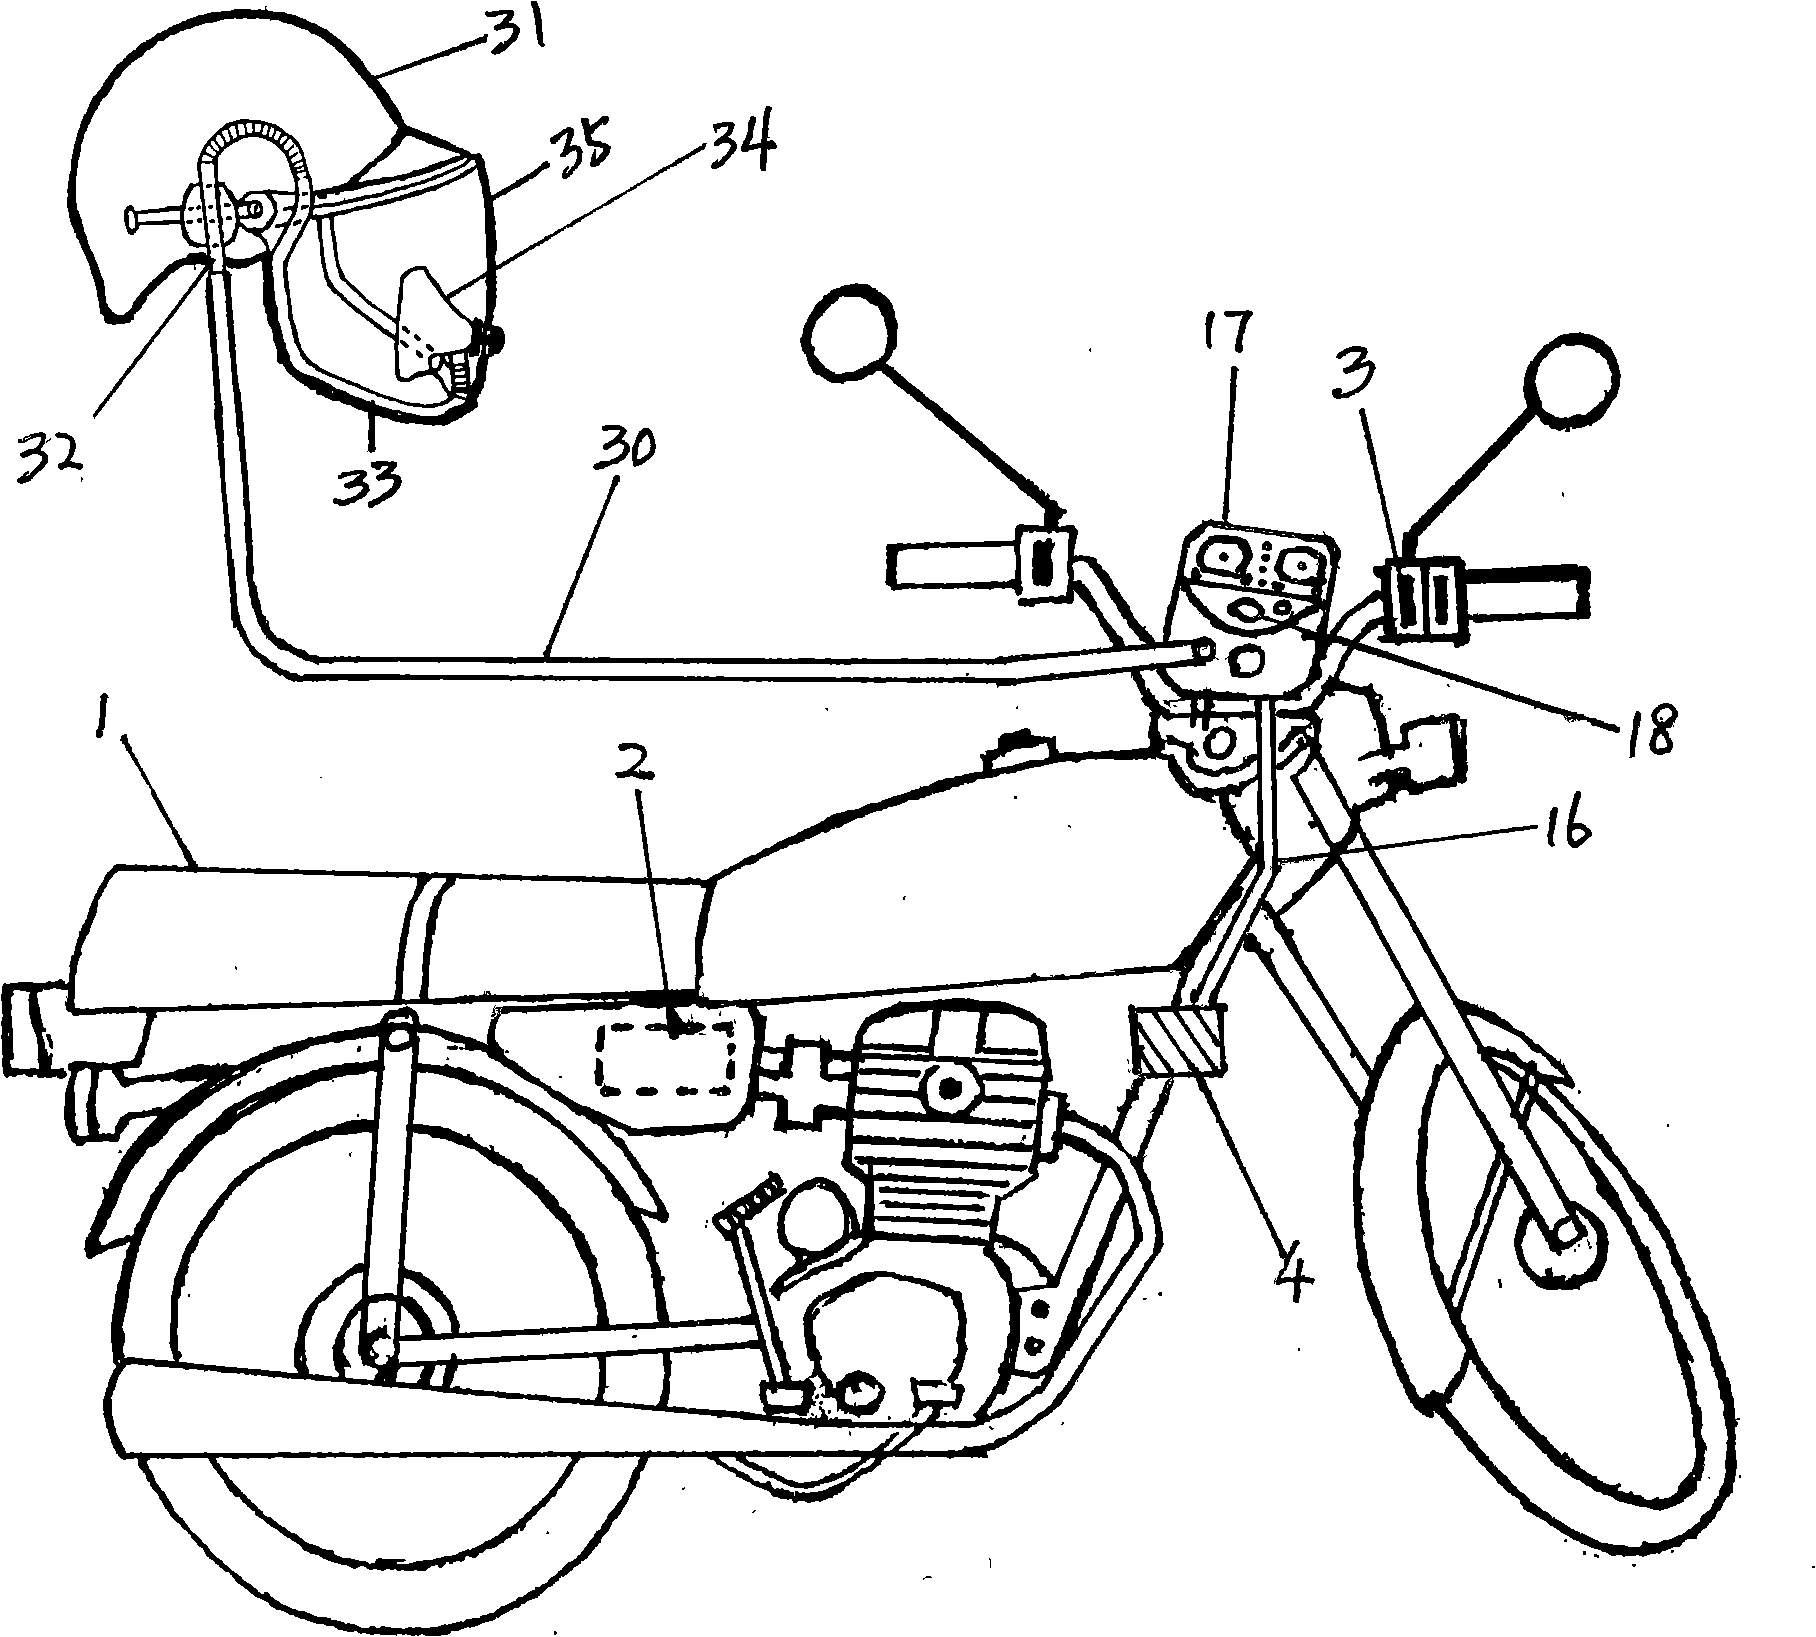 Special air filter for motorcycle and electric vehicle